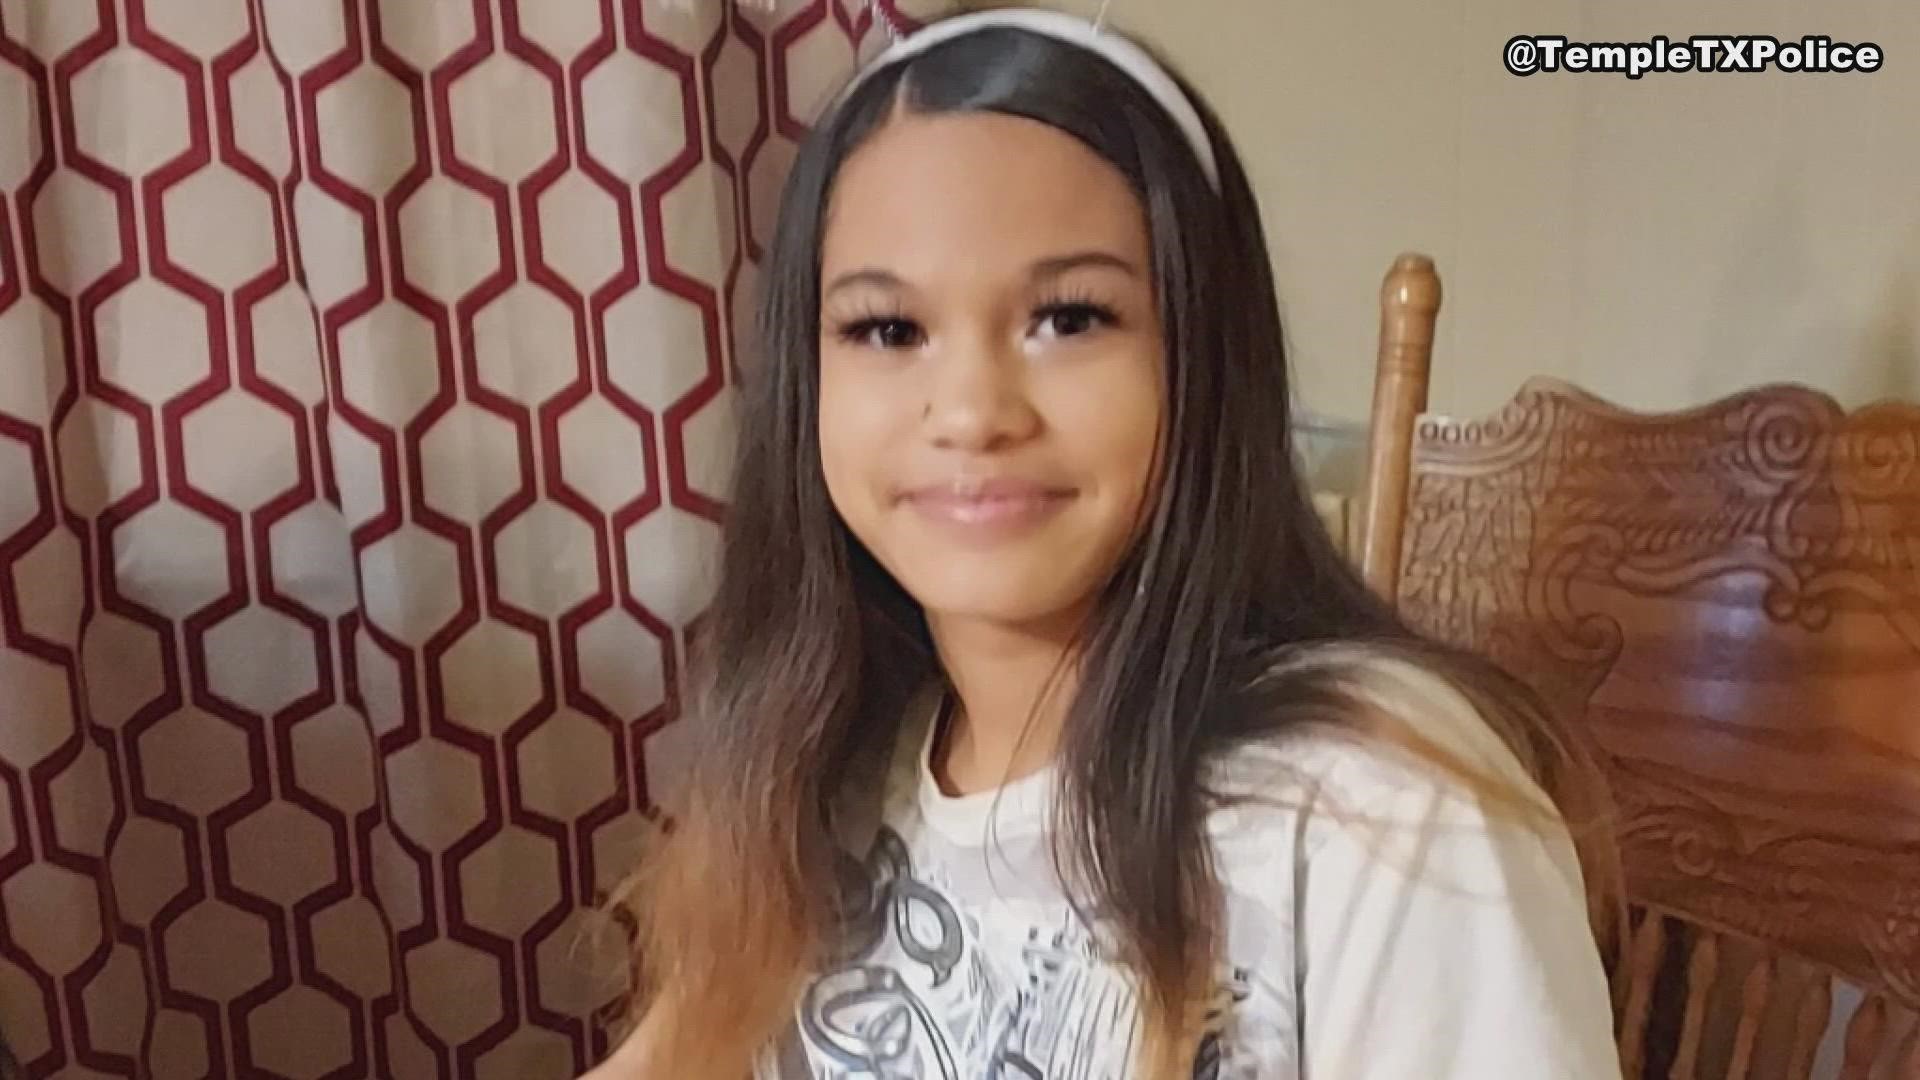 If you've seen 13-year-old Marcela Hamilton-Ortiz, please contact Temple Police at (254) 298-5500.